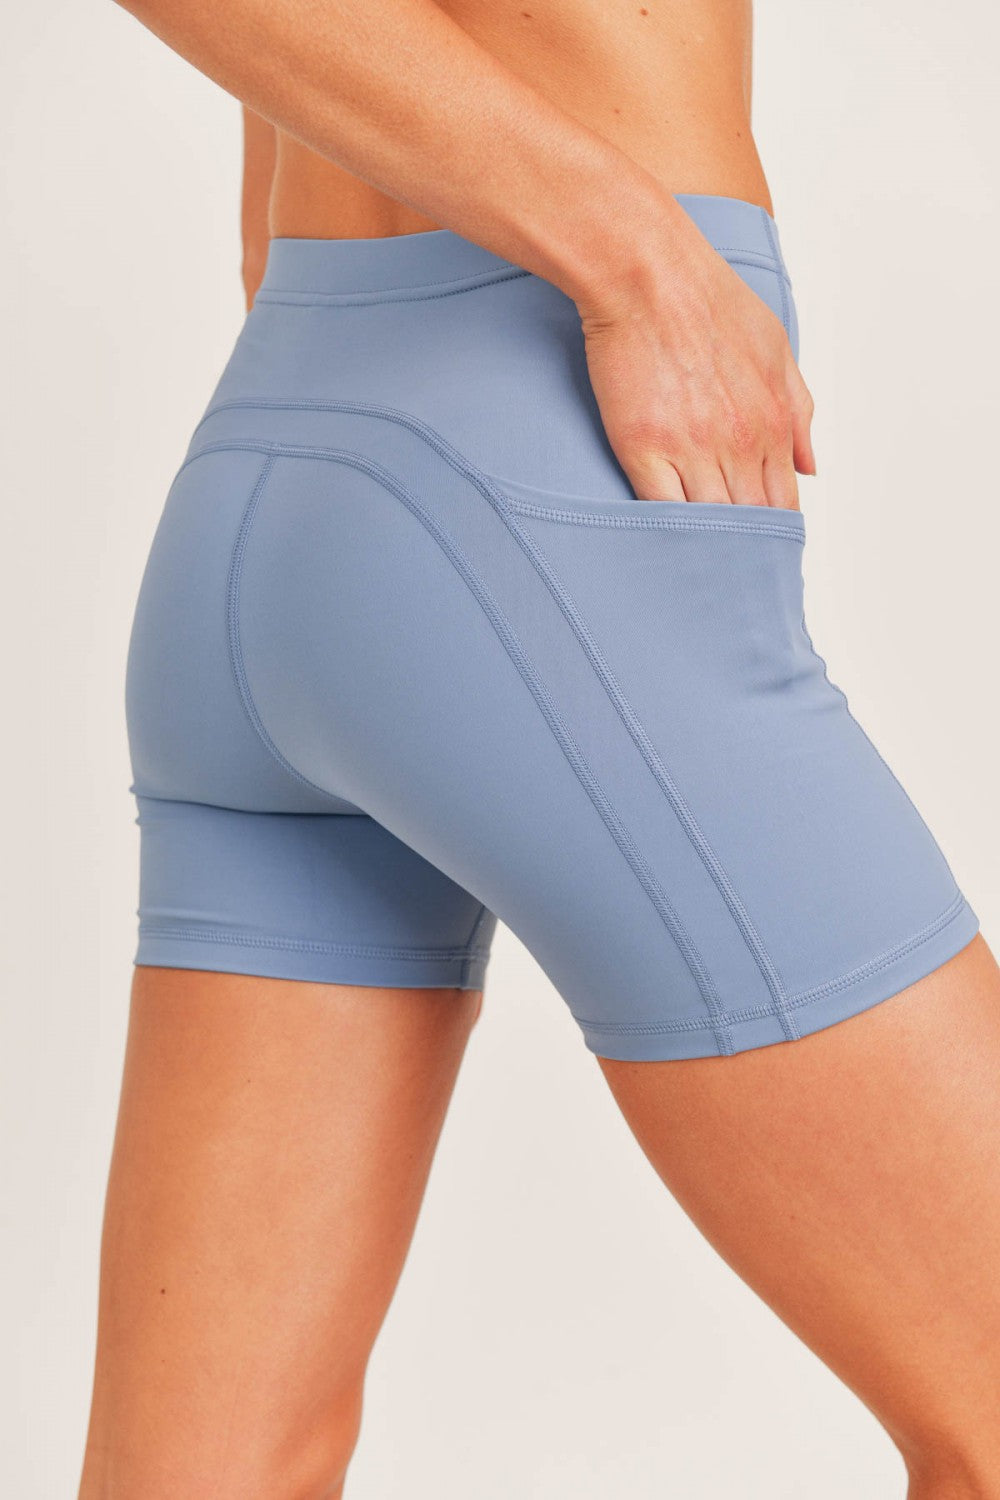 HERMOSA NO FRONT SEAM SWOOP SHORTS - APH8109